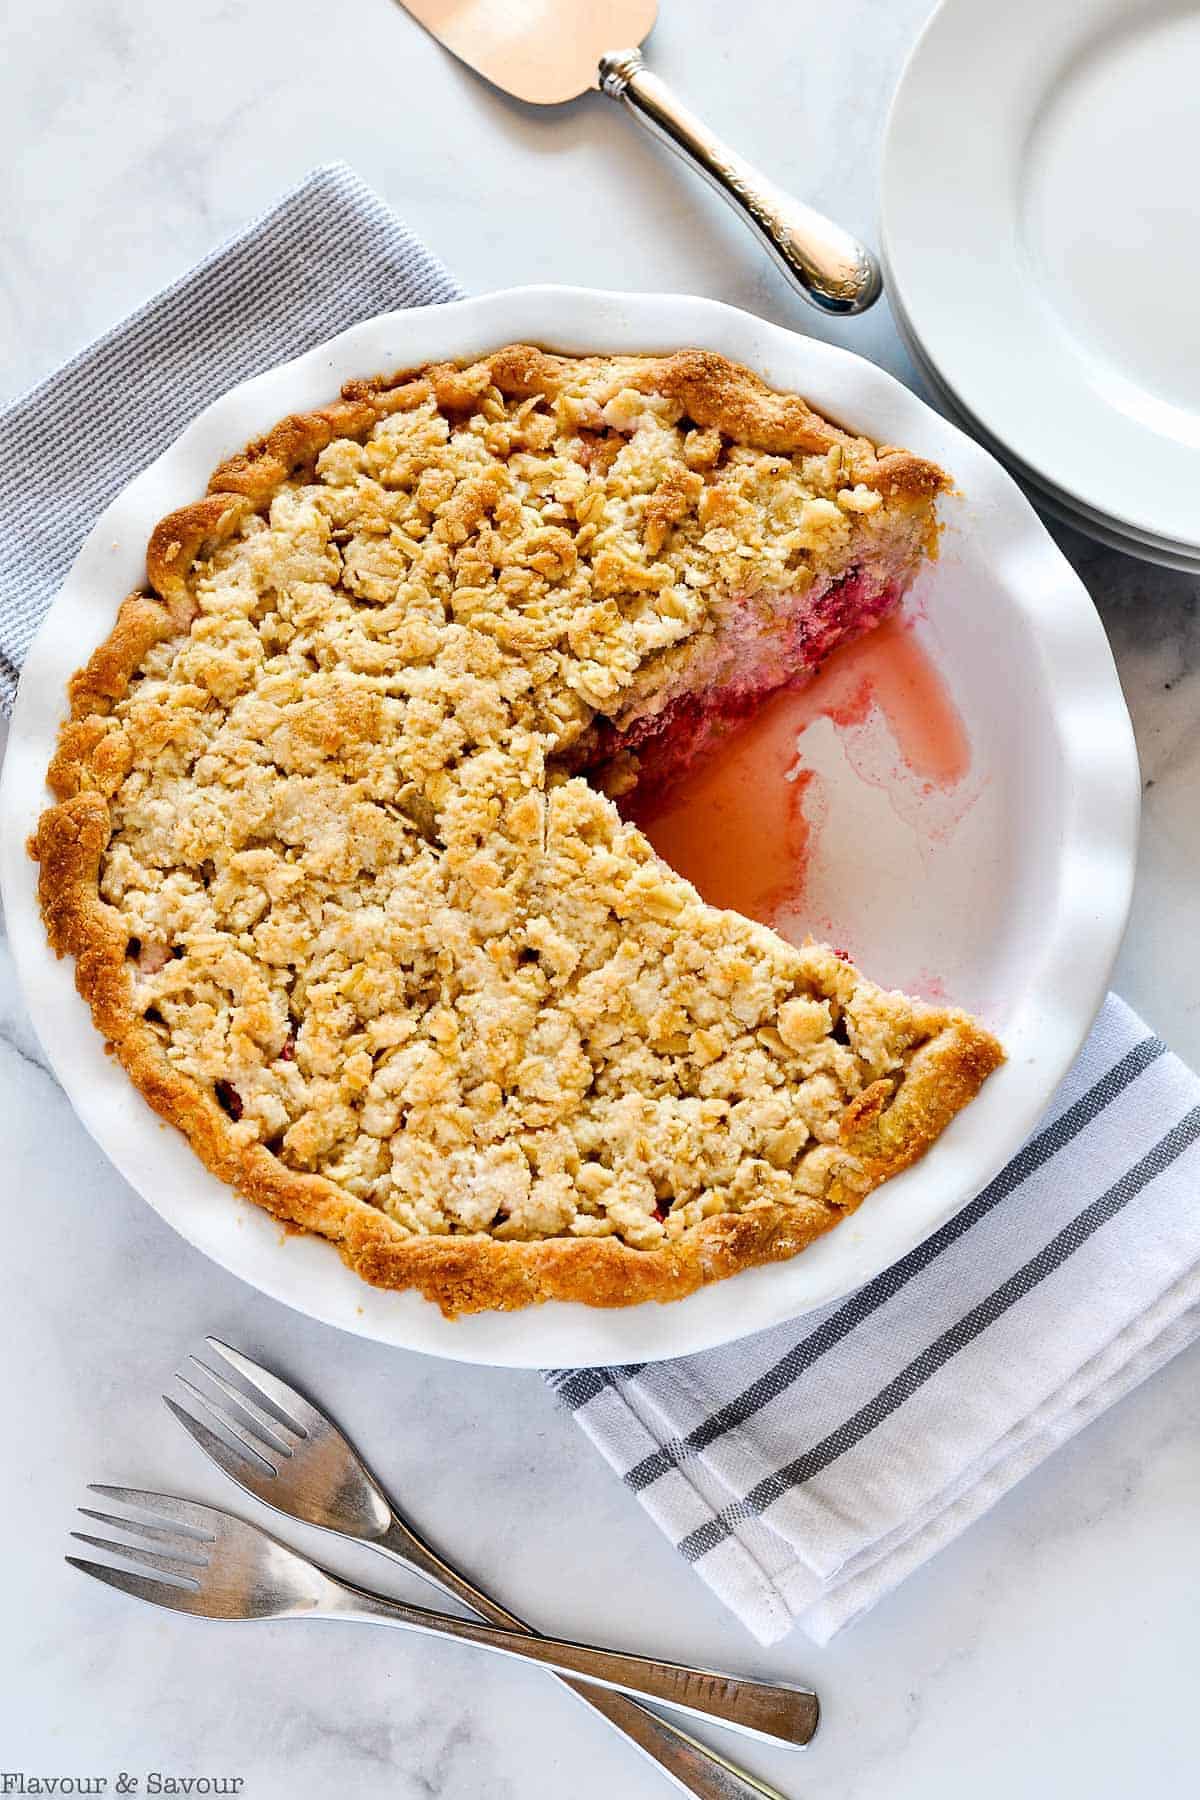 Baked Strawberry Rhubarb Crumb Pie with one slice removed.